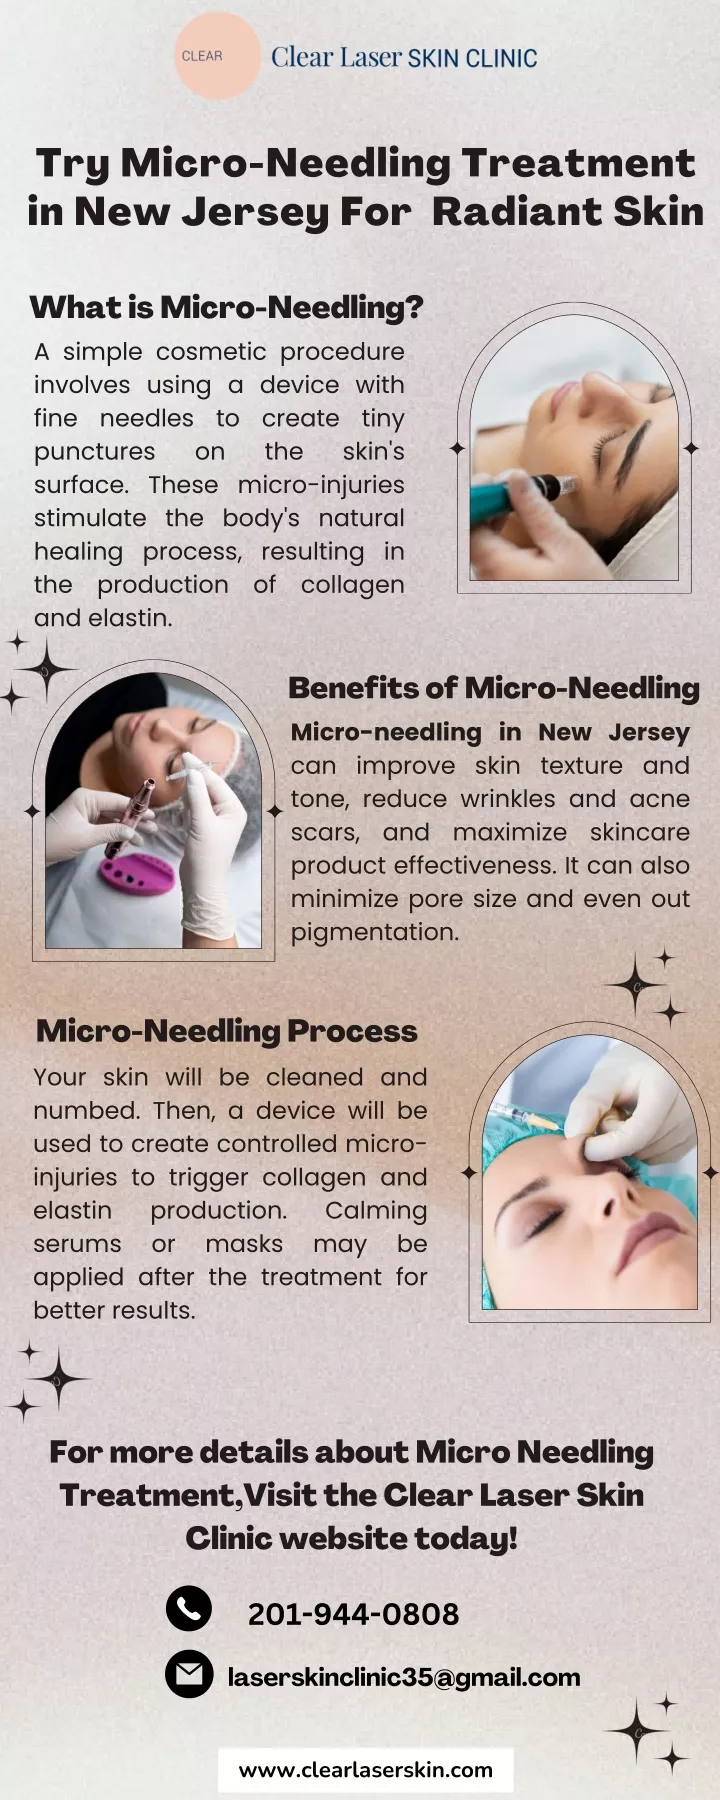 PPT - Try Micro-Needling Treatment in New Jersey For Radiant Skin ! PowerPoint Presentation - ID:13050283